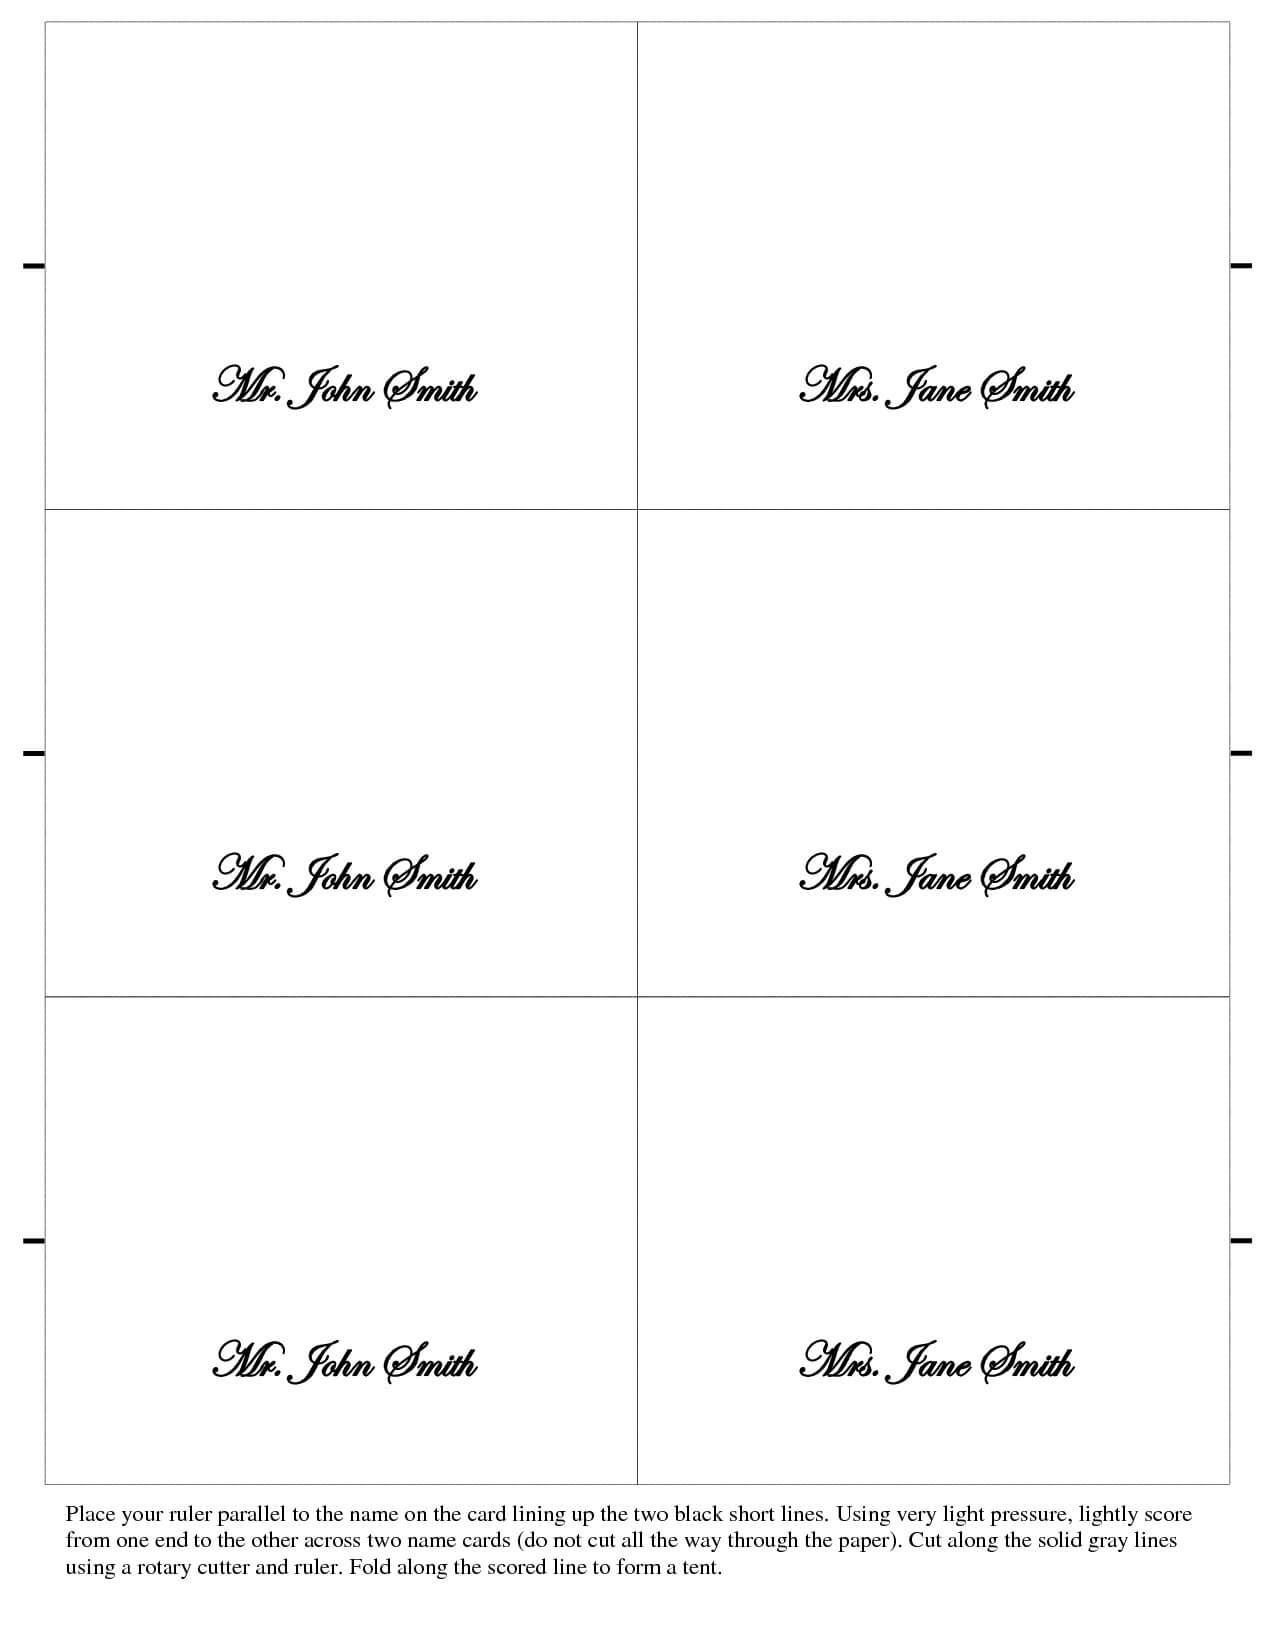 Blank Place Cards Luxmove Pro Card Template Free Download With Regard To Free Place Card Templates Download